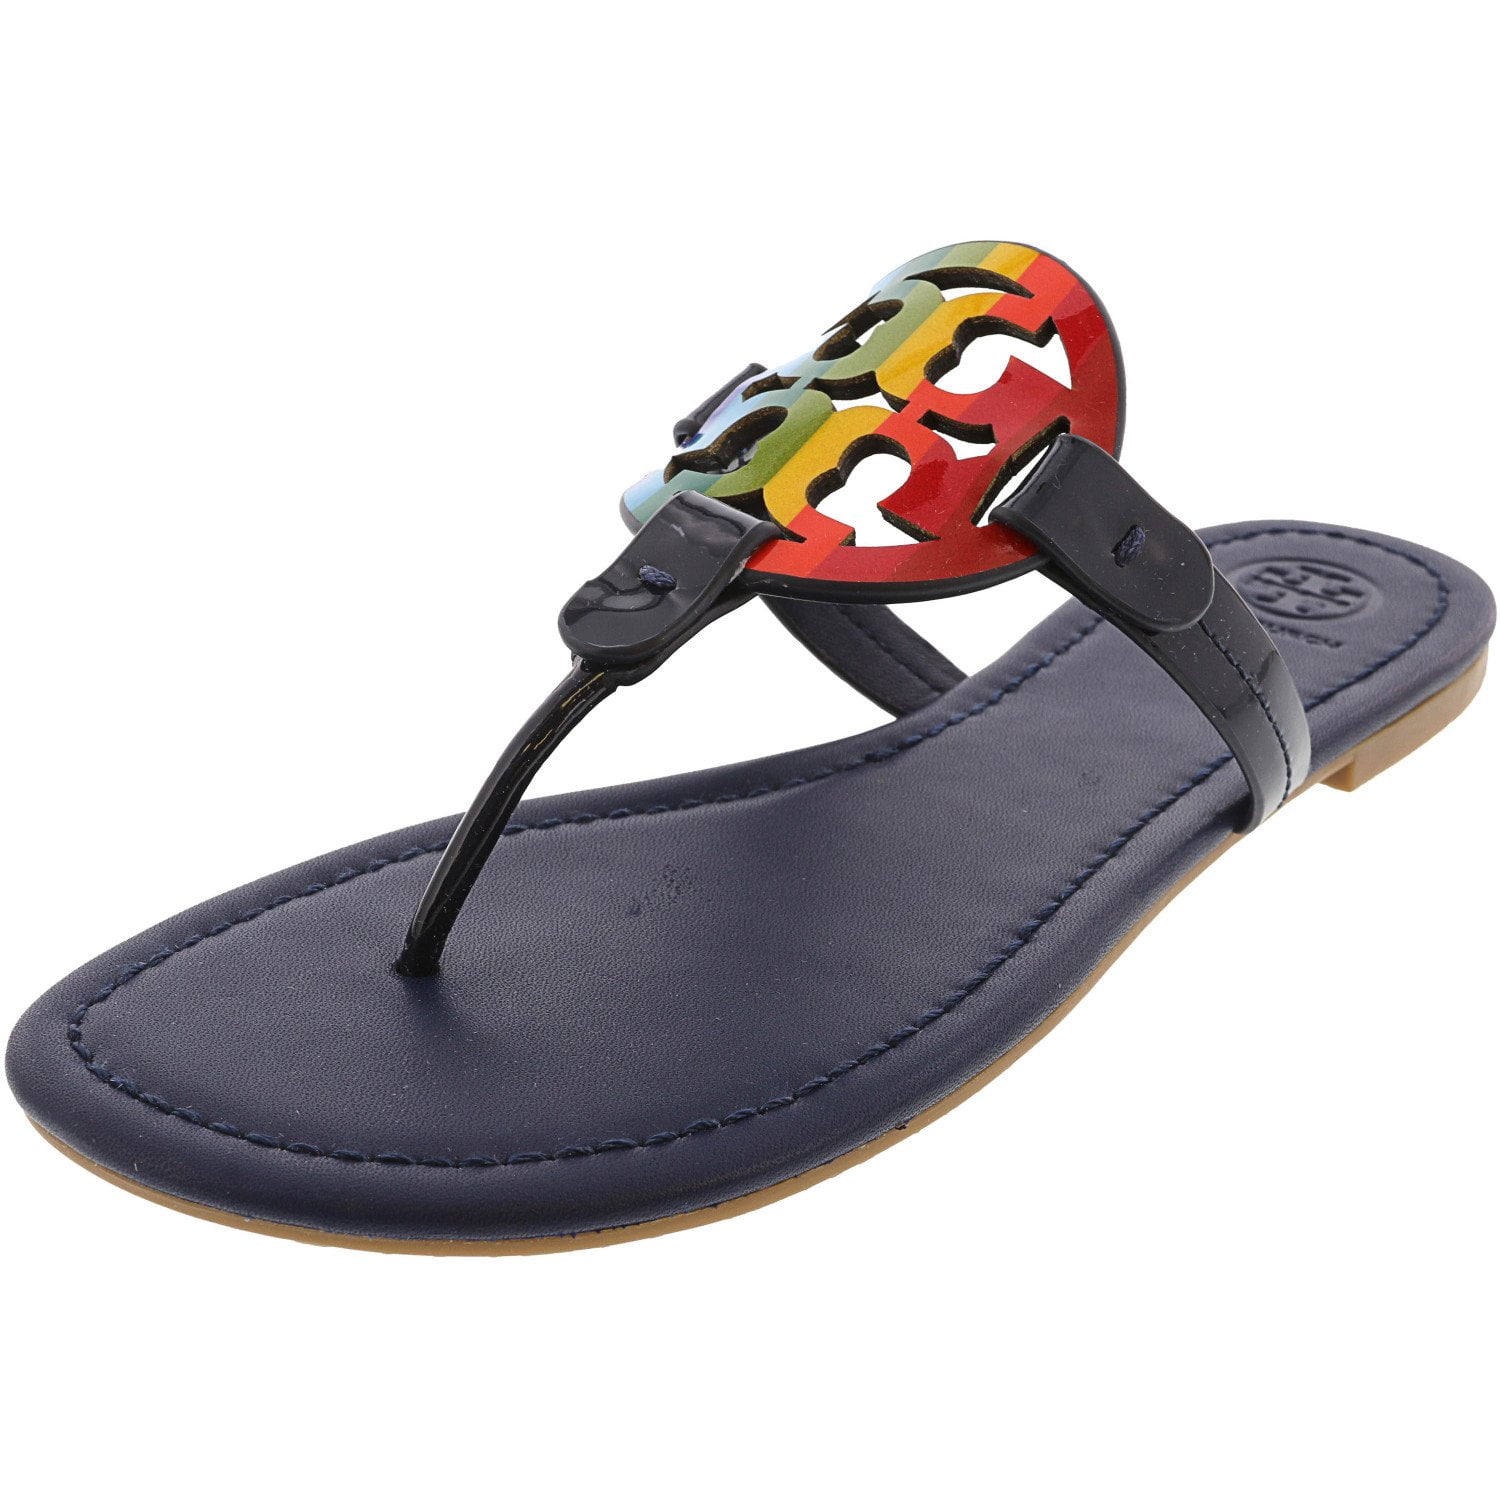 tory burch red rainbow sandals